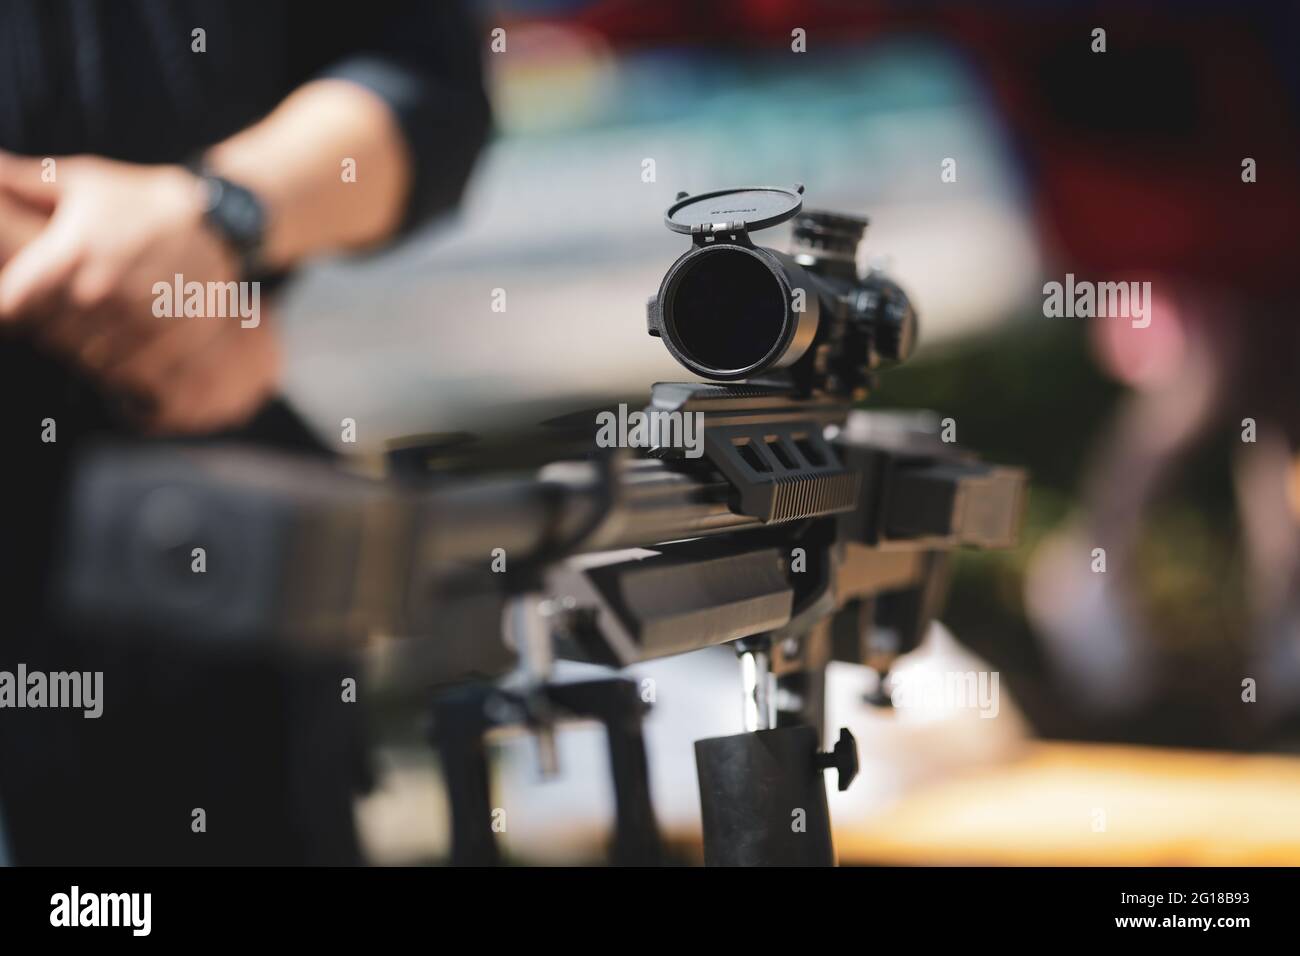 Bucharest, Romania - June 5, 2021: Shallow depth of field (selective focus) image with a .50 caliber sniper rifle. Stock Photo